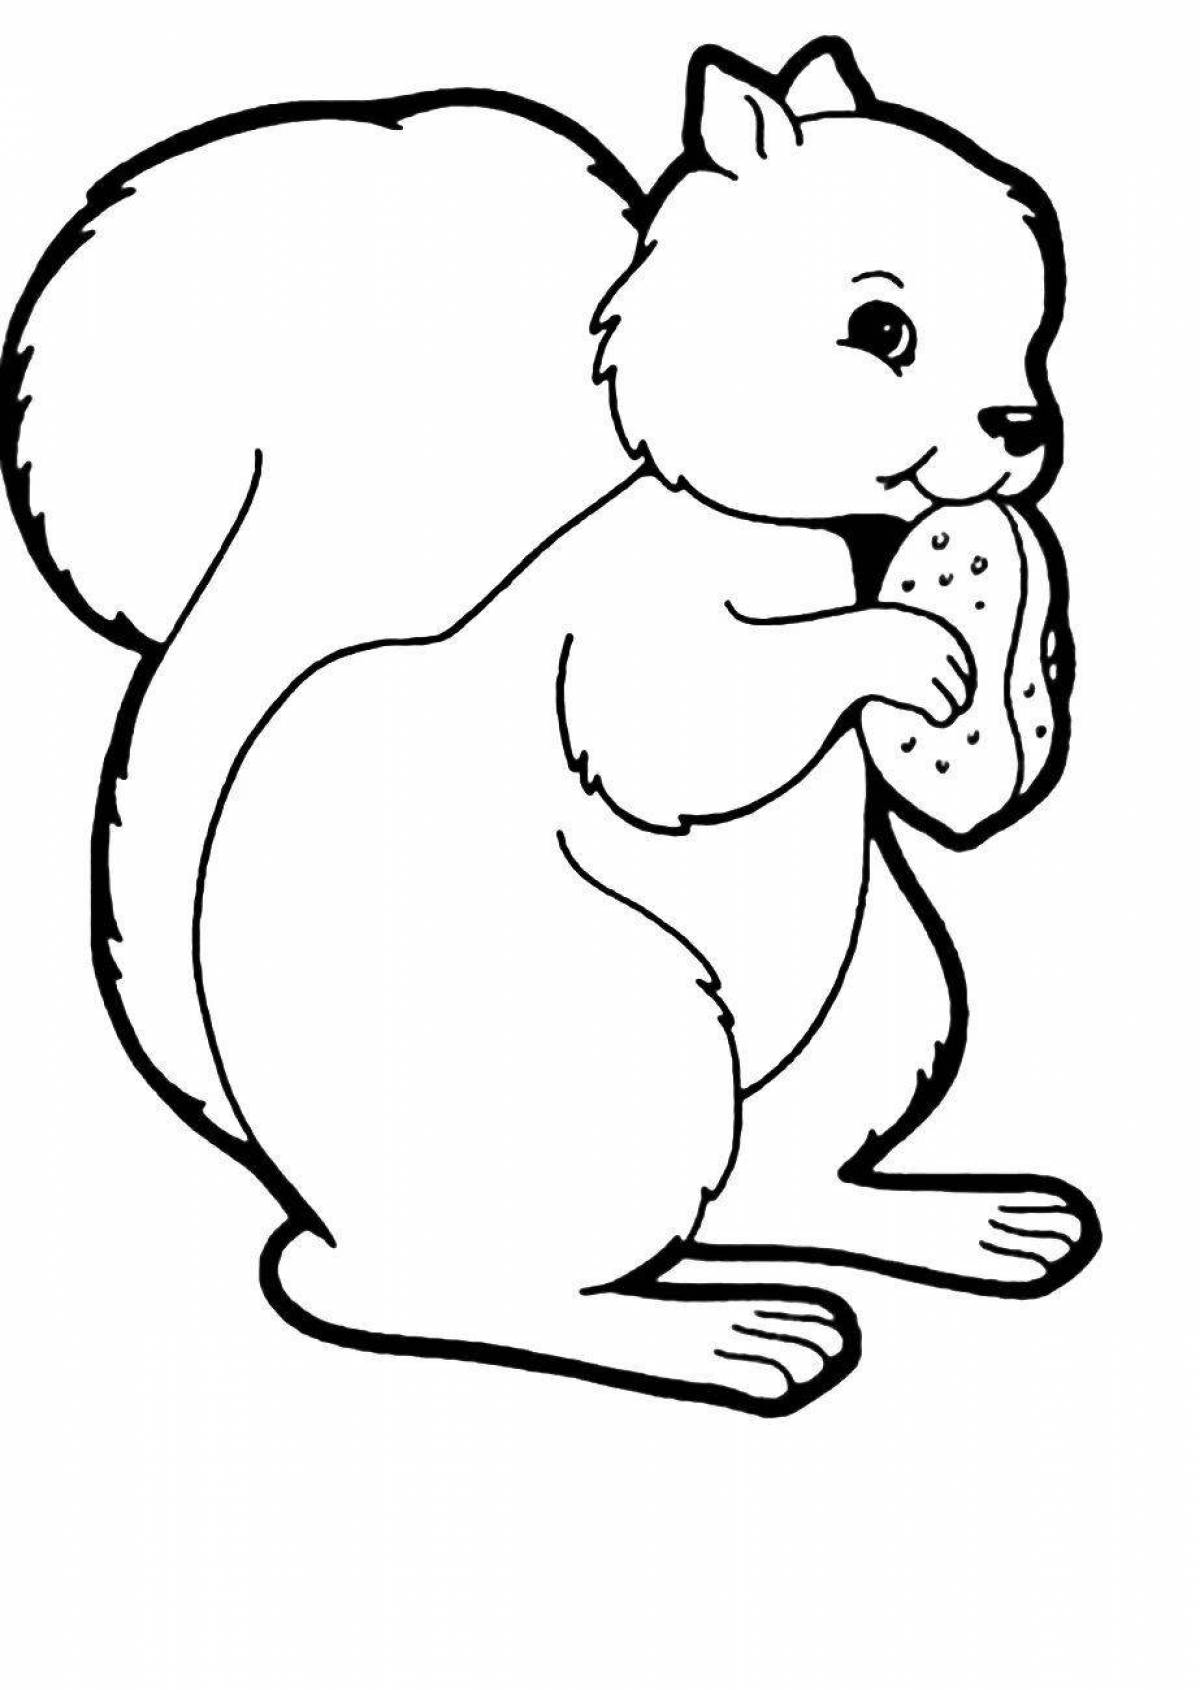 Animated forest animal coloring page